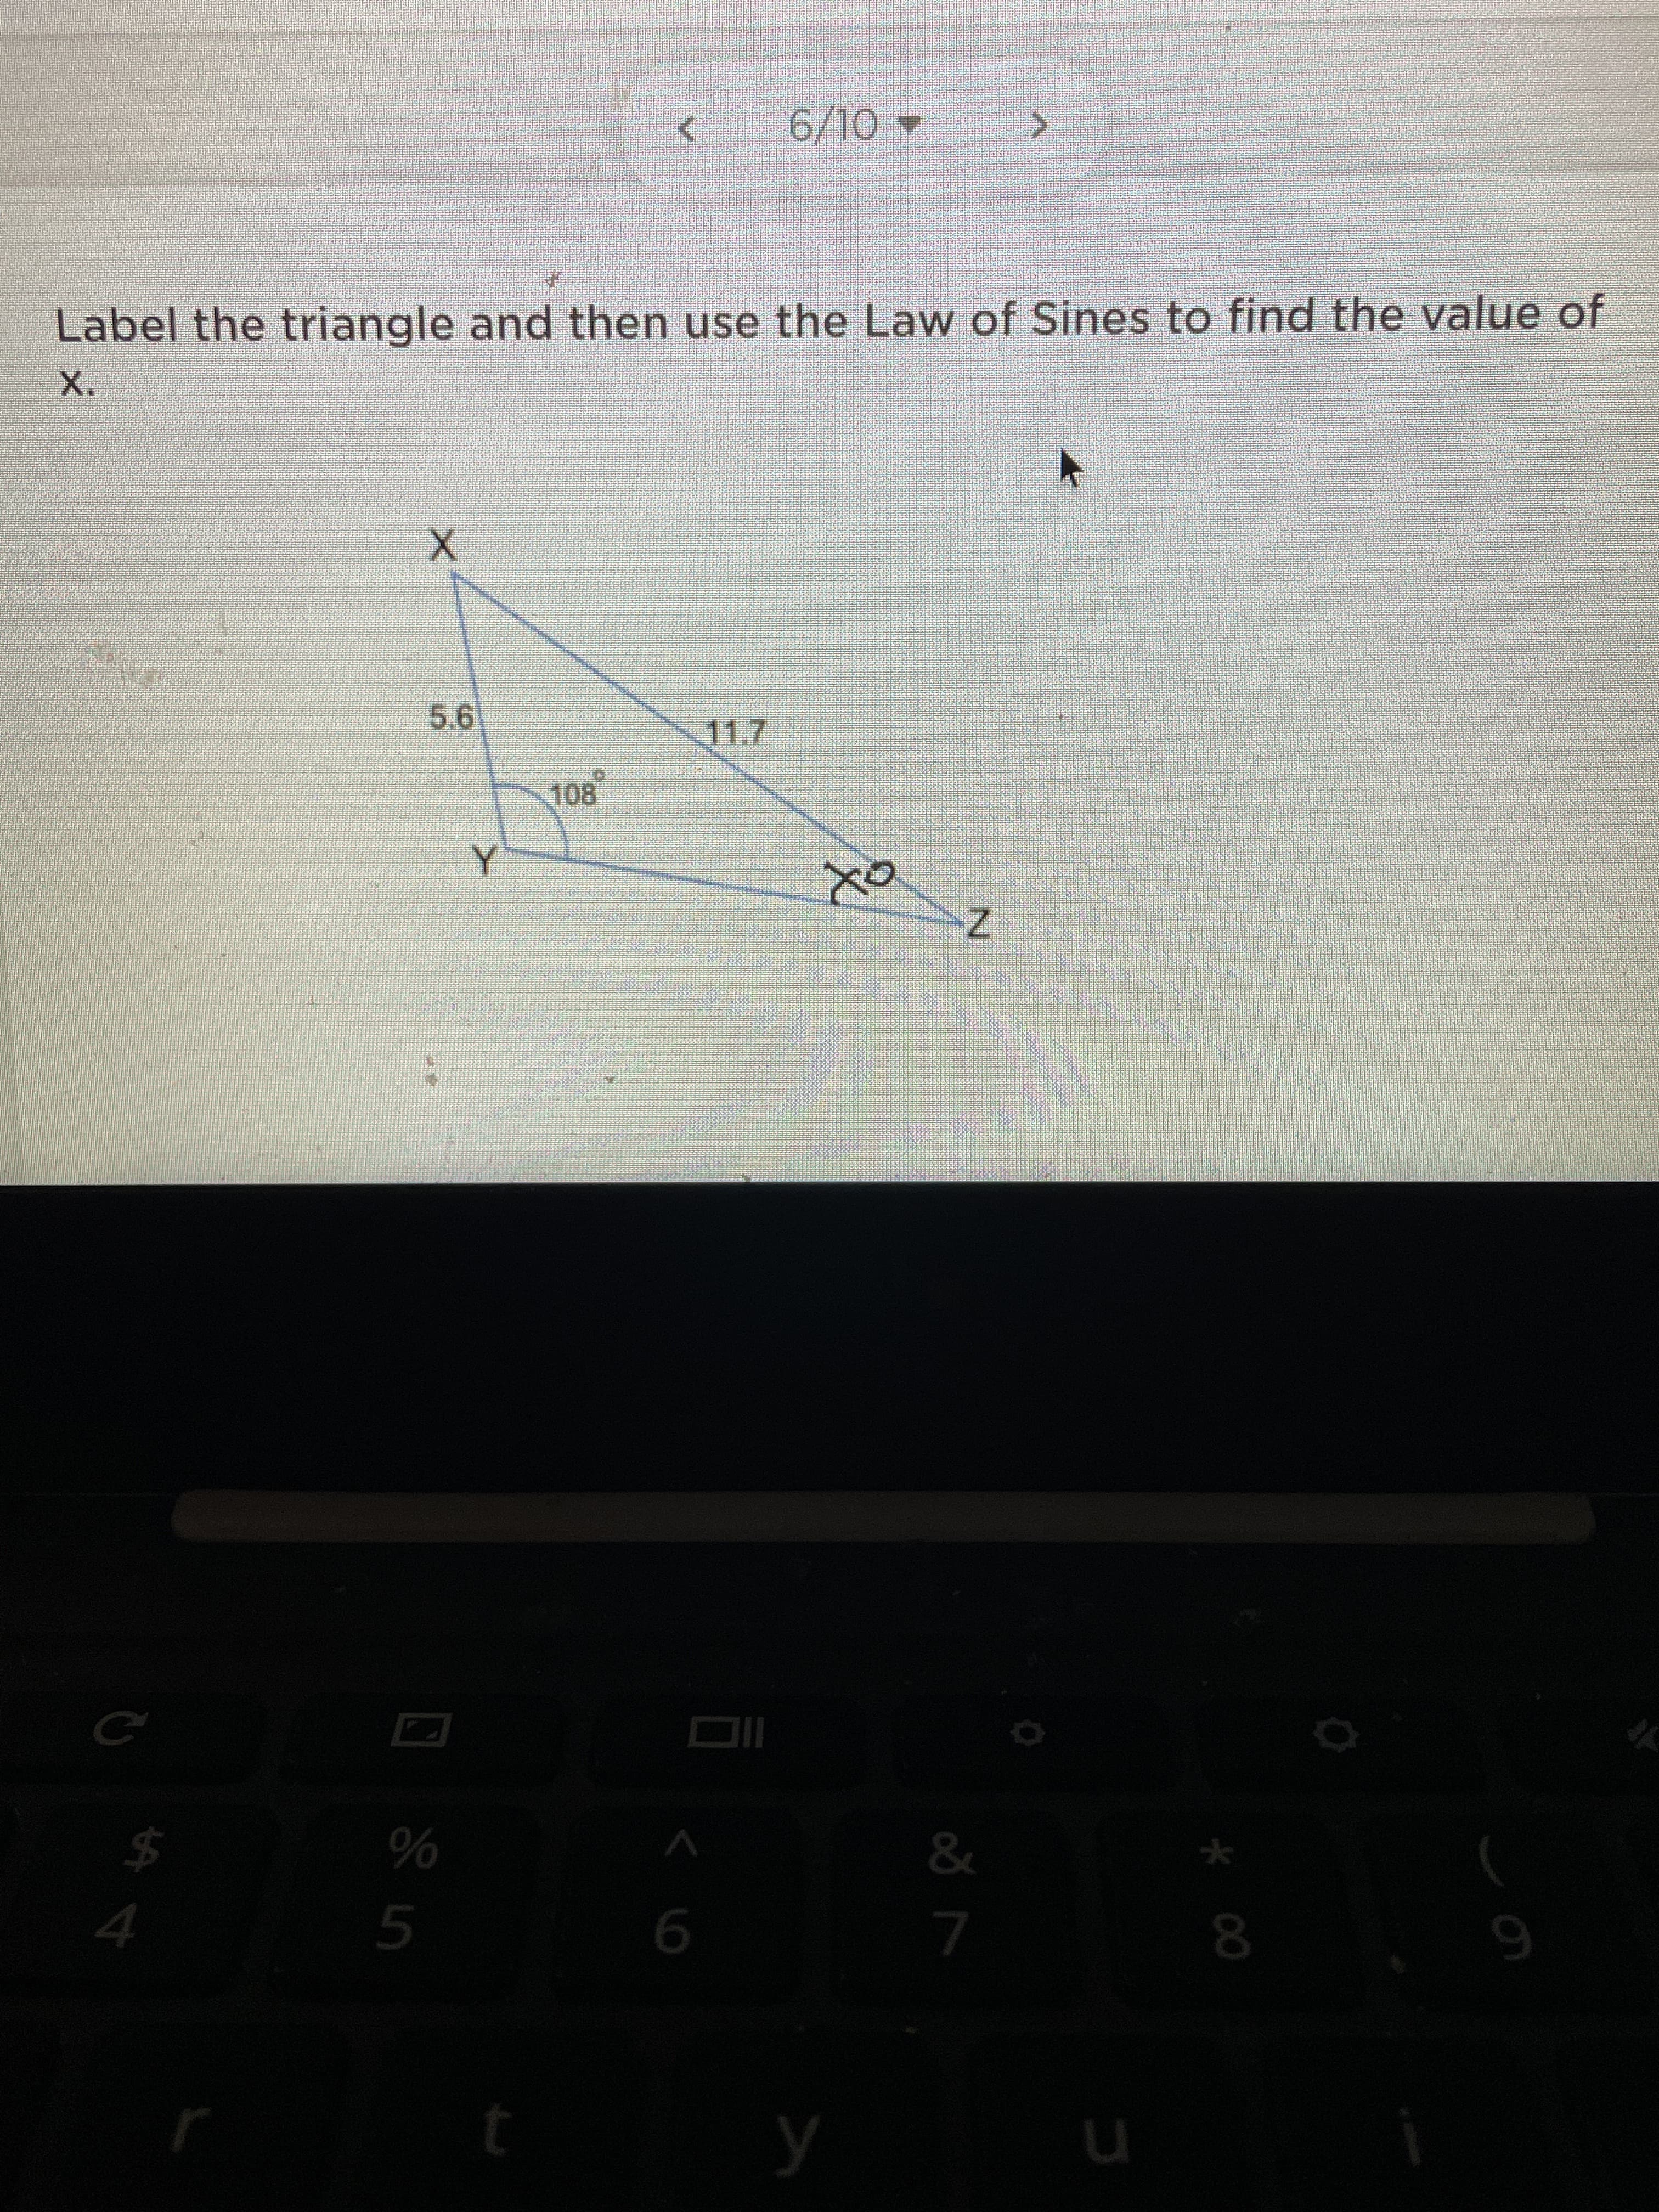 Label the triangle and then use the Law of Sines to find the value of
X.
